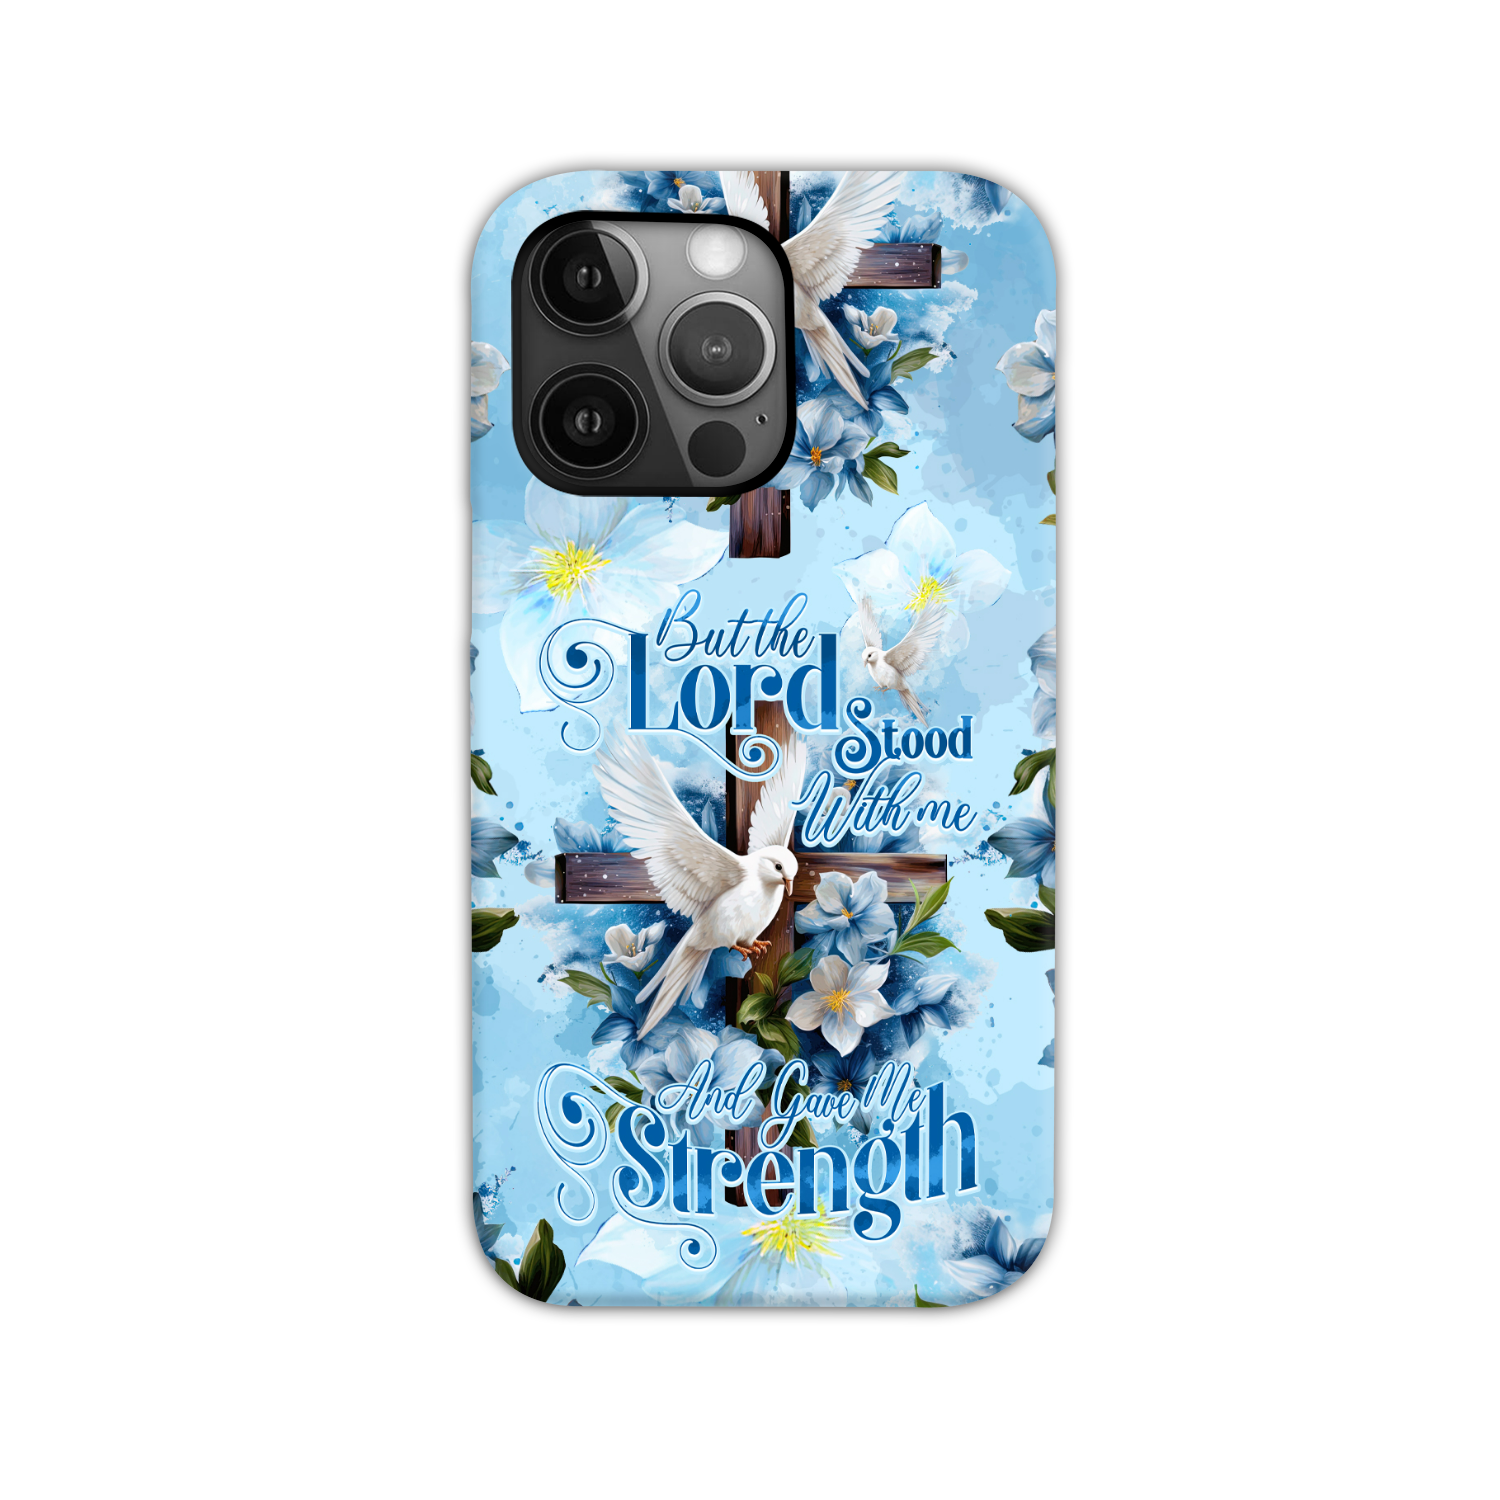 Lord Stood With Me Phone Case - Tytd2808234